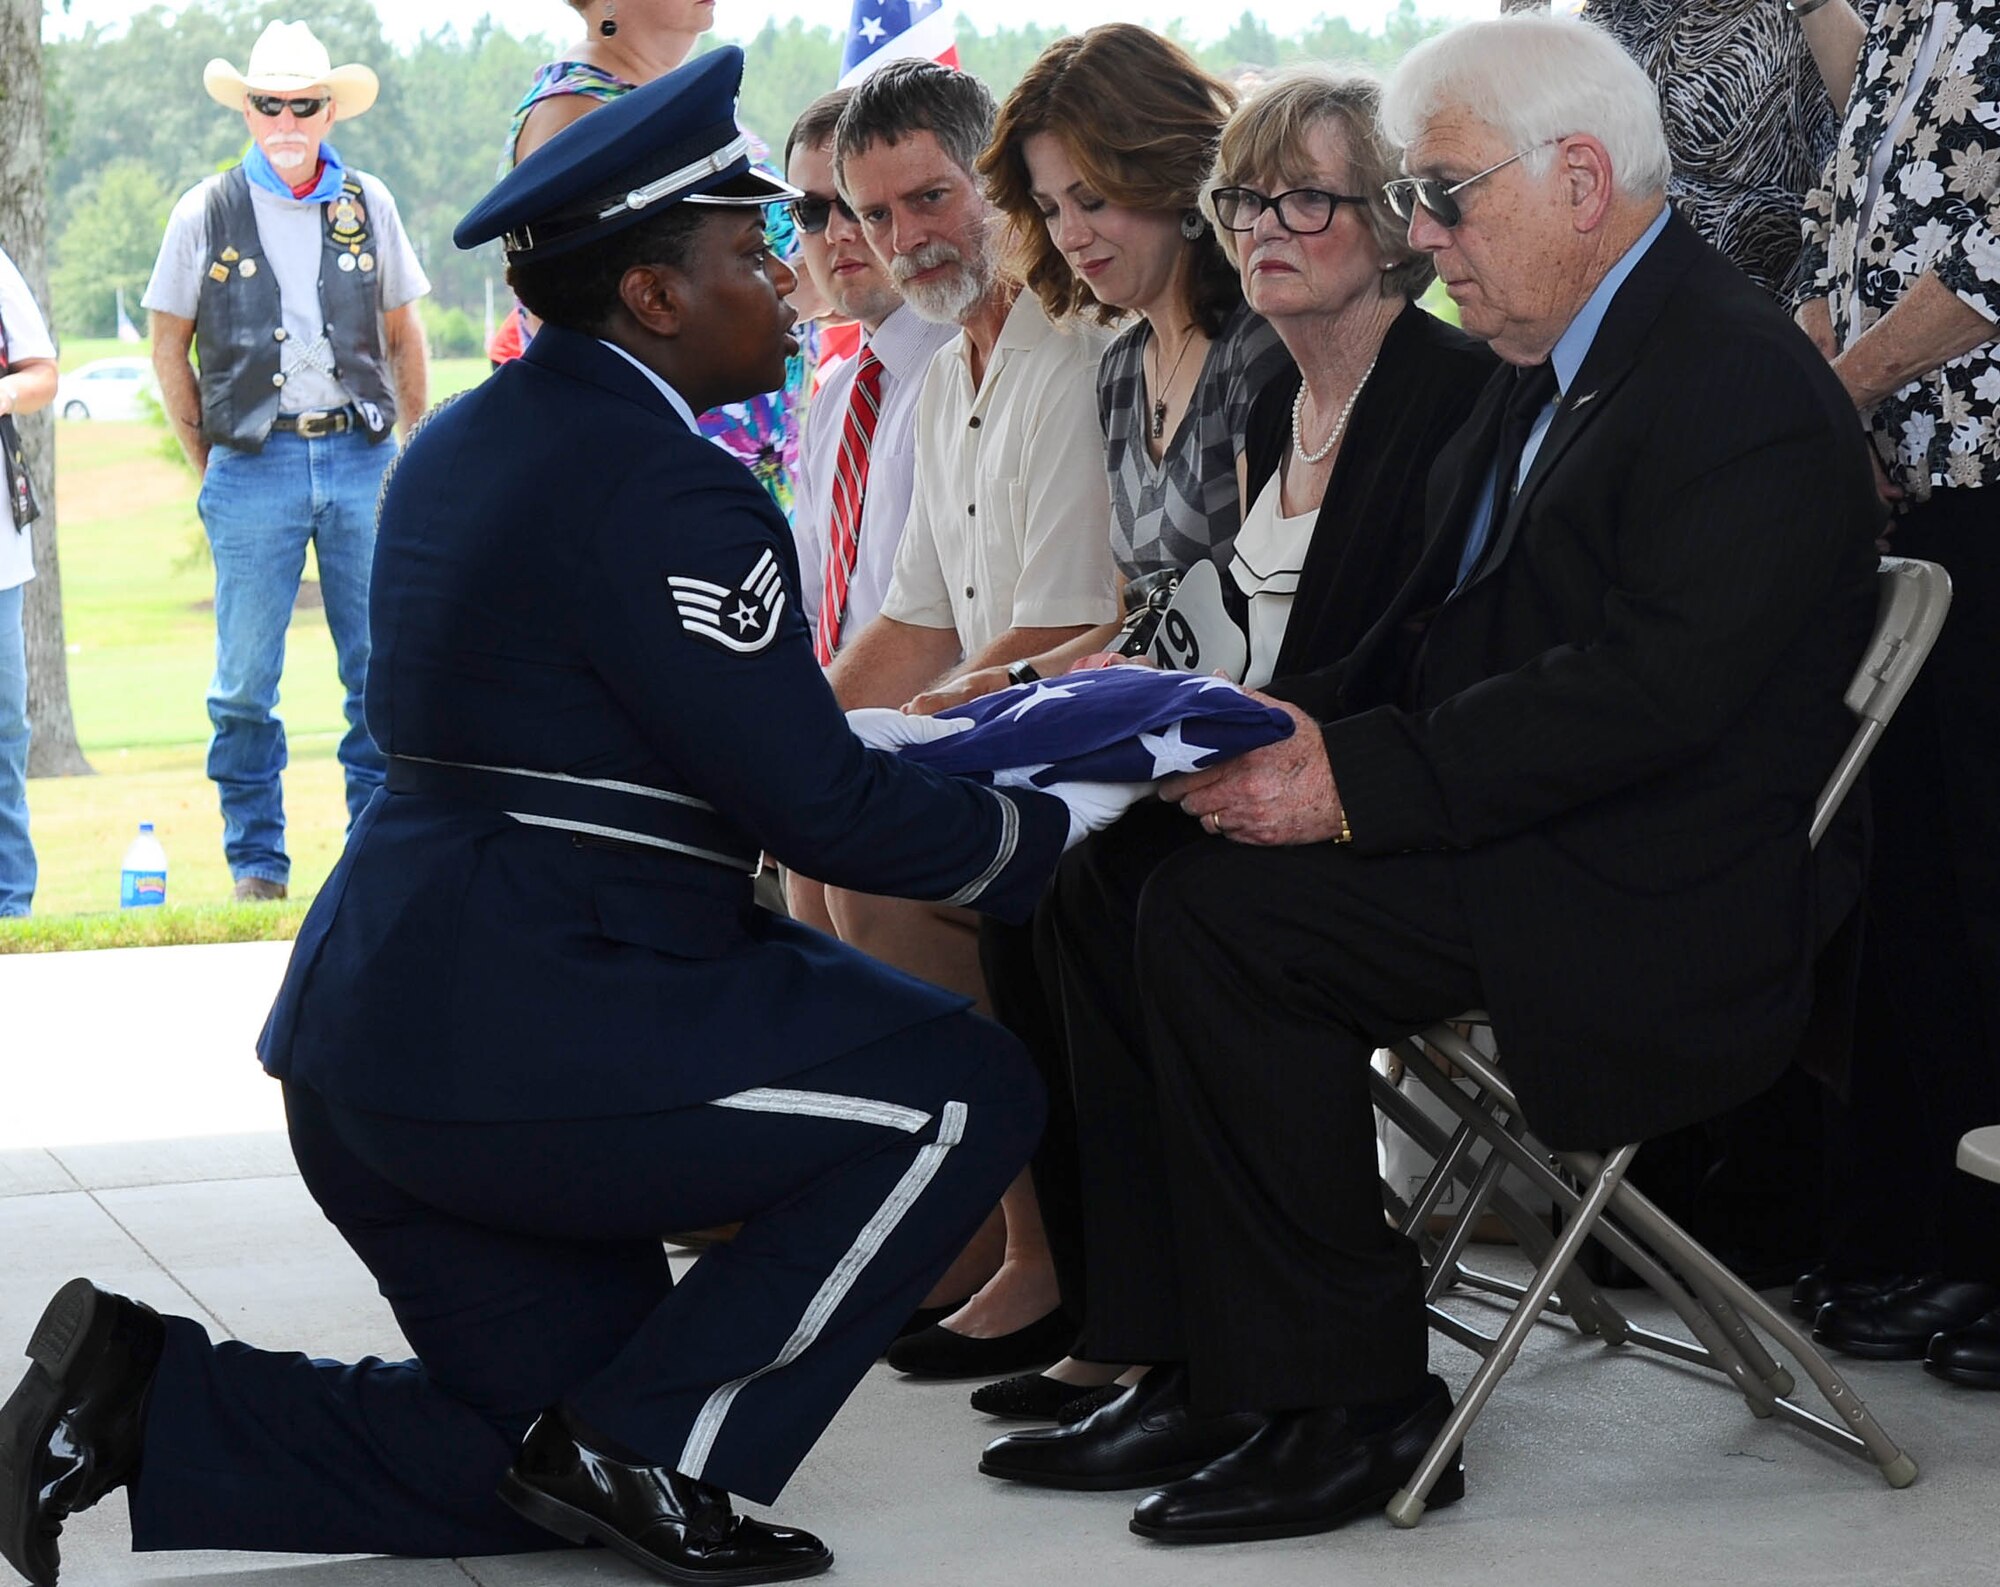 Staff Sgt. Sherring Goodwin, a honor guardsman from Columbus Air Force Base, Mississippi, presents the folded American flag to Joe Partridge, the brother of the late Capt. Frederick Partridge, Aug. 10, 2015, at the Mississippi Veterans Memorial Cemetery. Full honors were presented for Frederick, to include a flag folding, firing party, color team and a bugle player who finished the ceremony with the playing of Taps. (U.S. Air Force photo/Senior Airman Kaleb Snay)